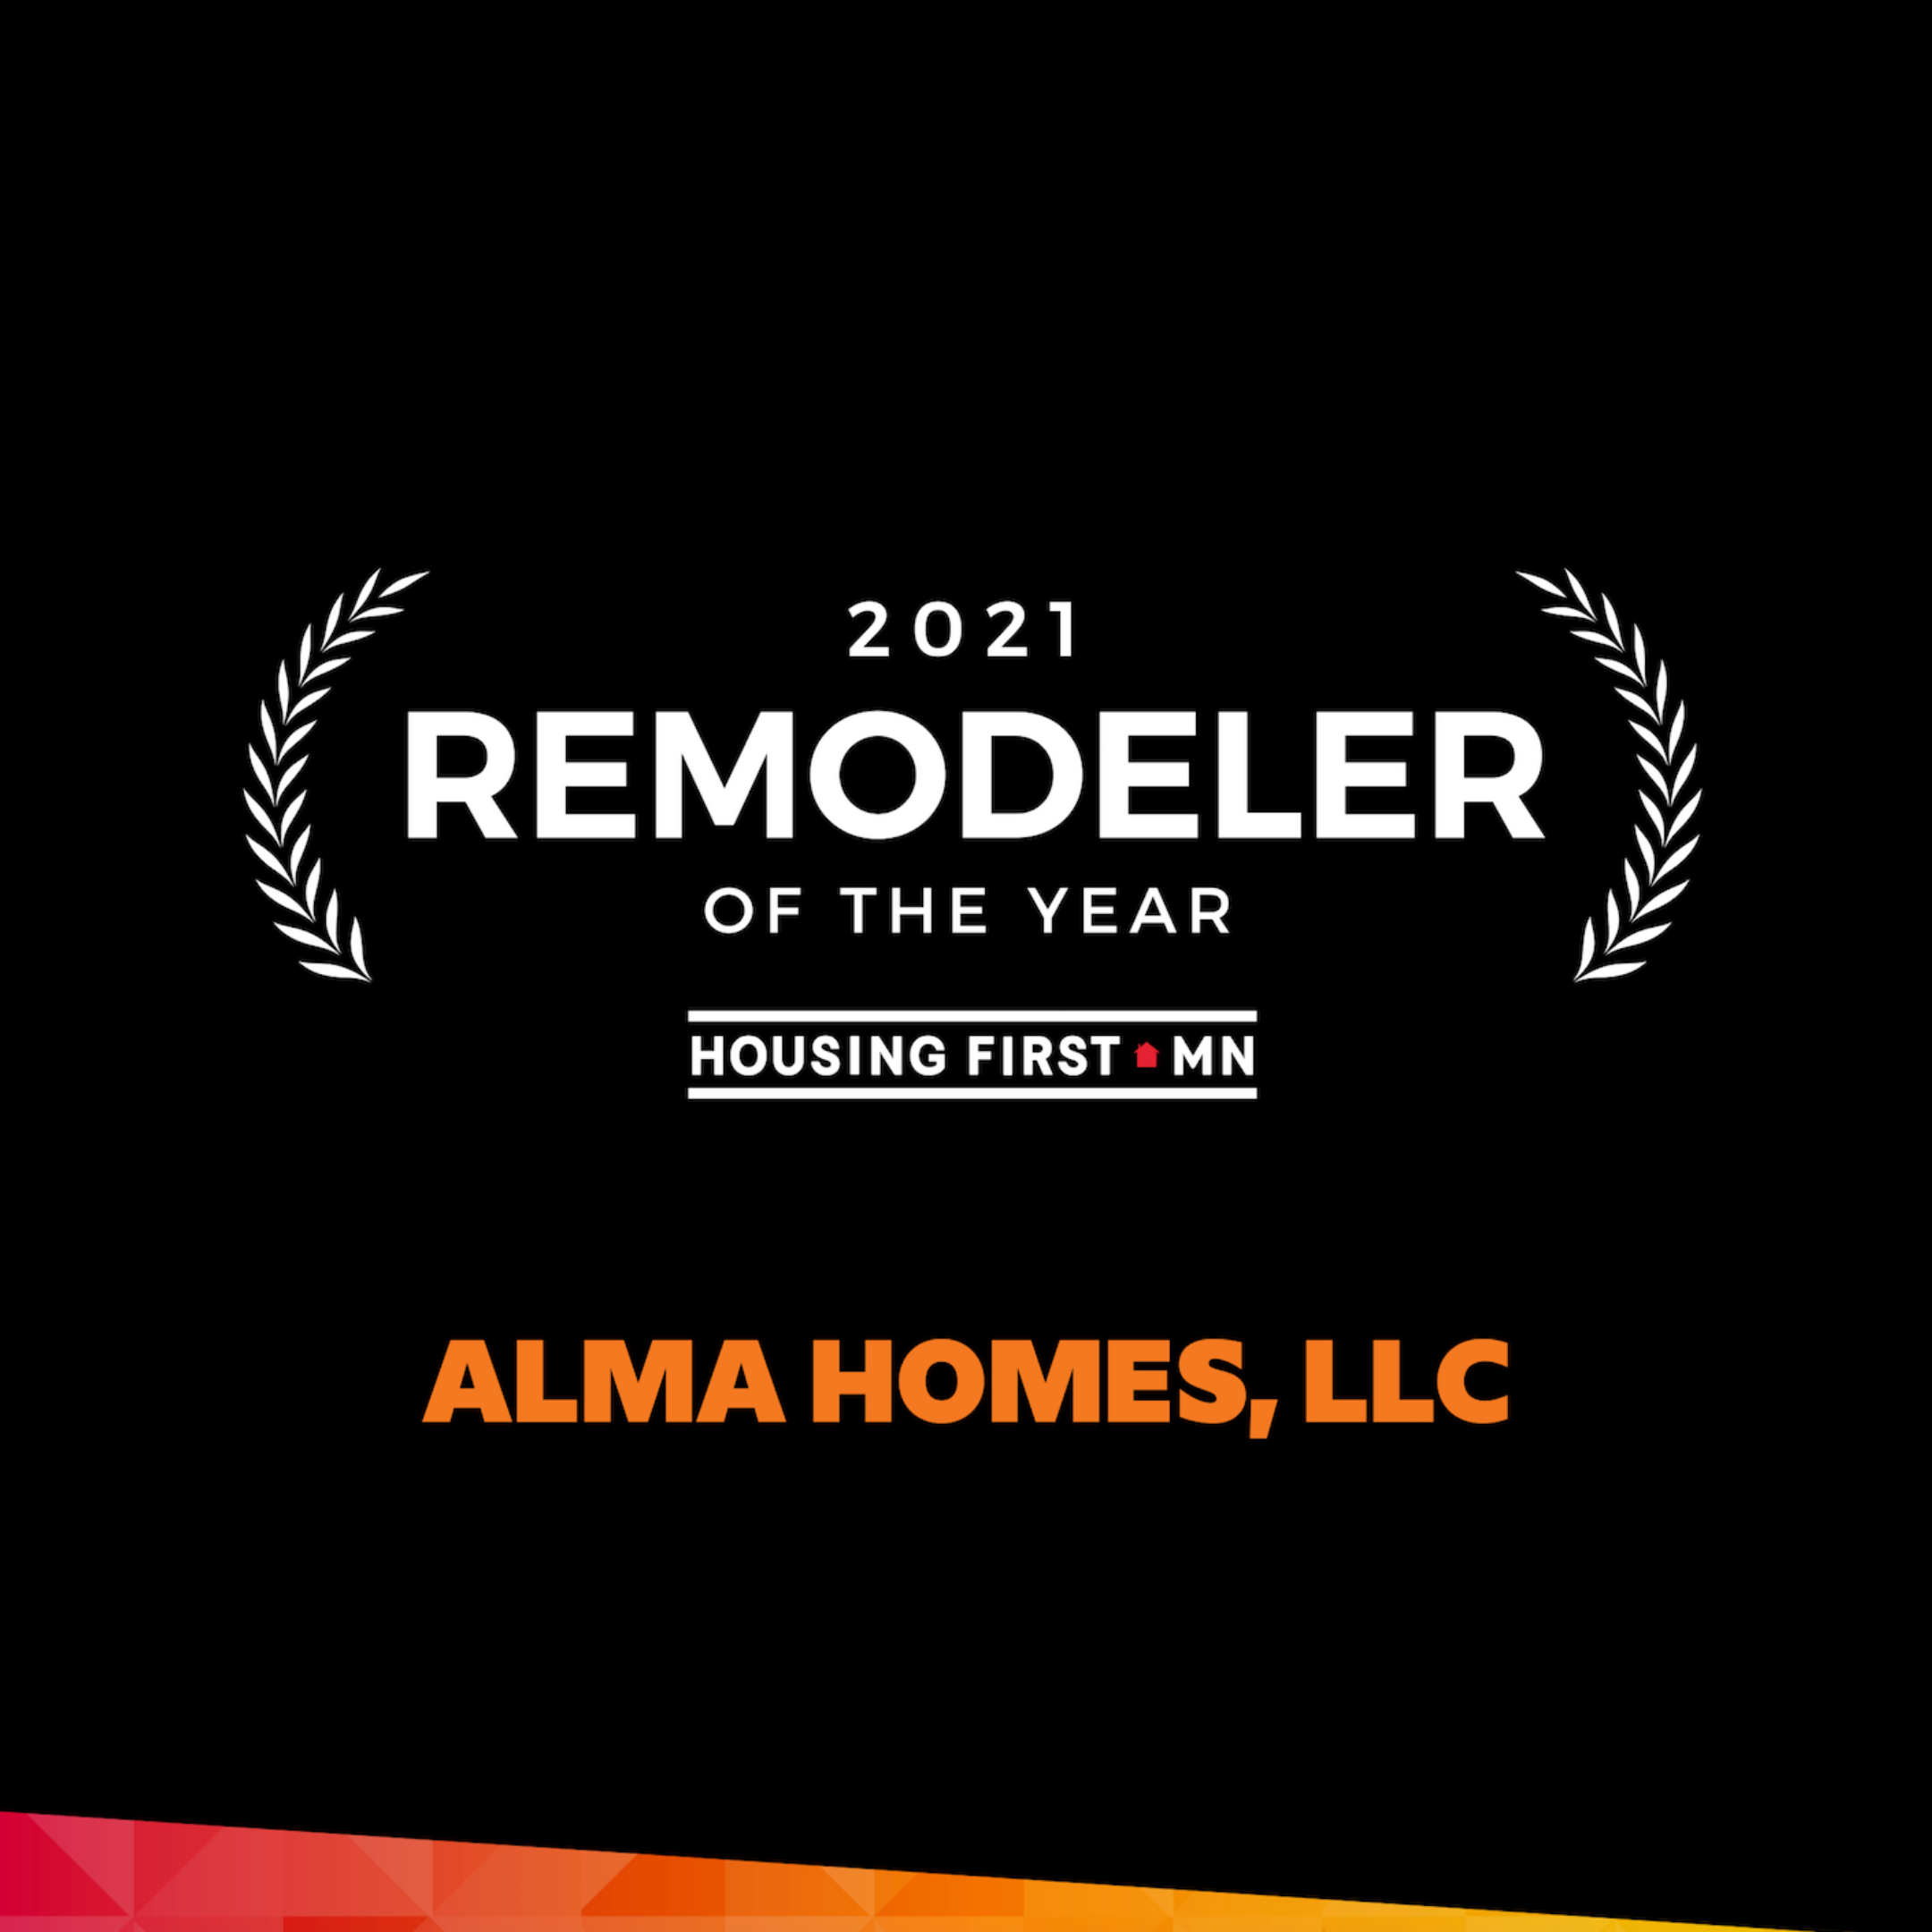 2021 Remodeler of the Year